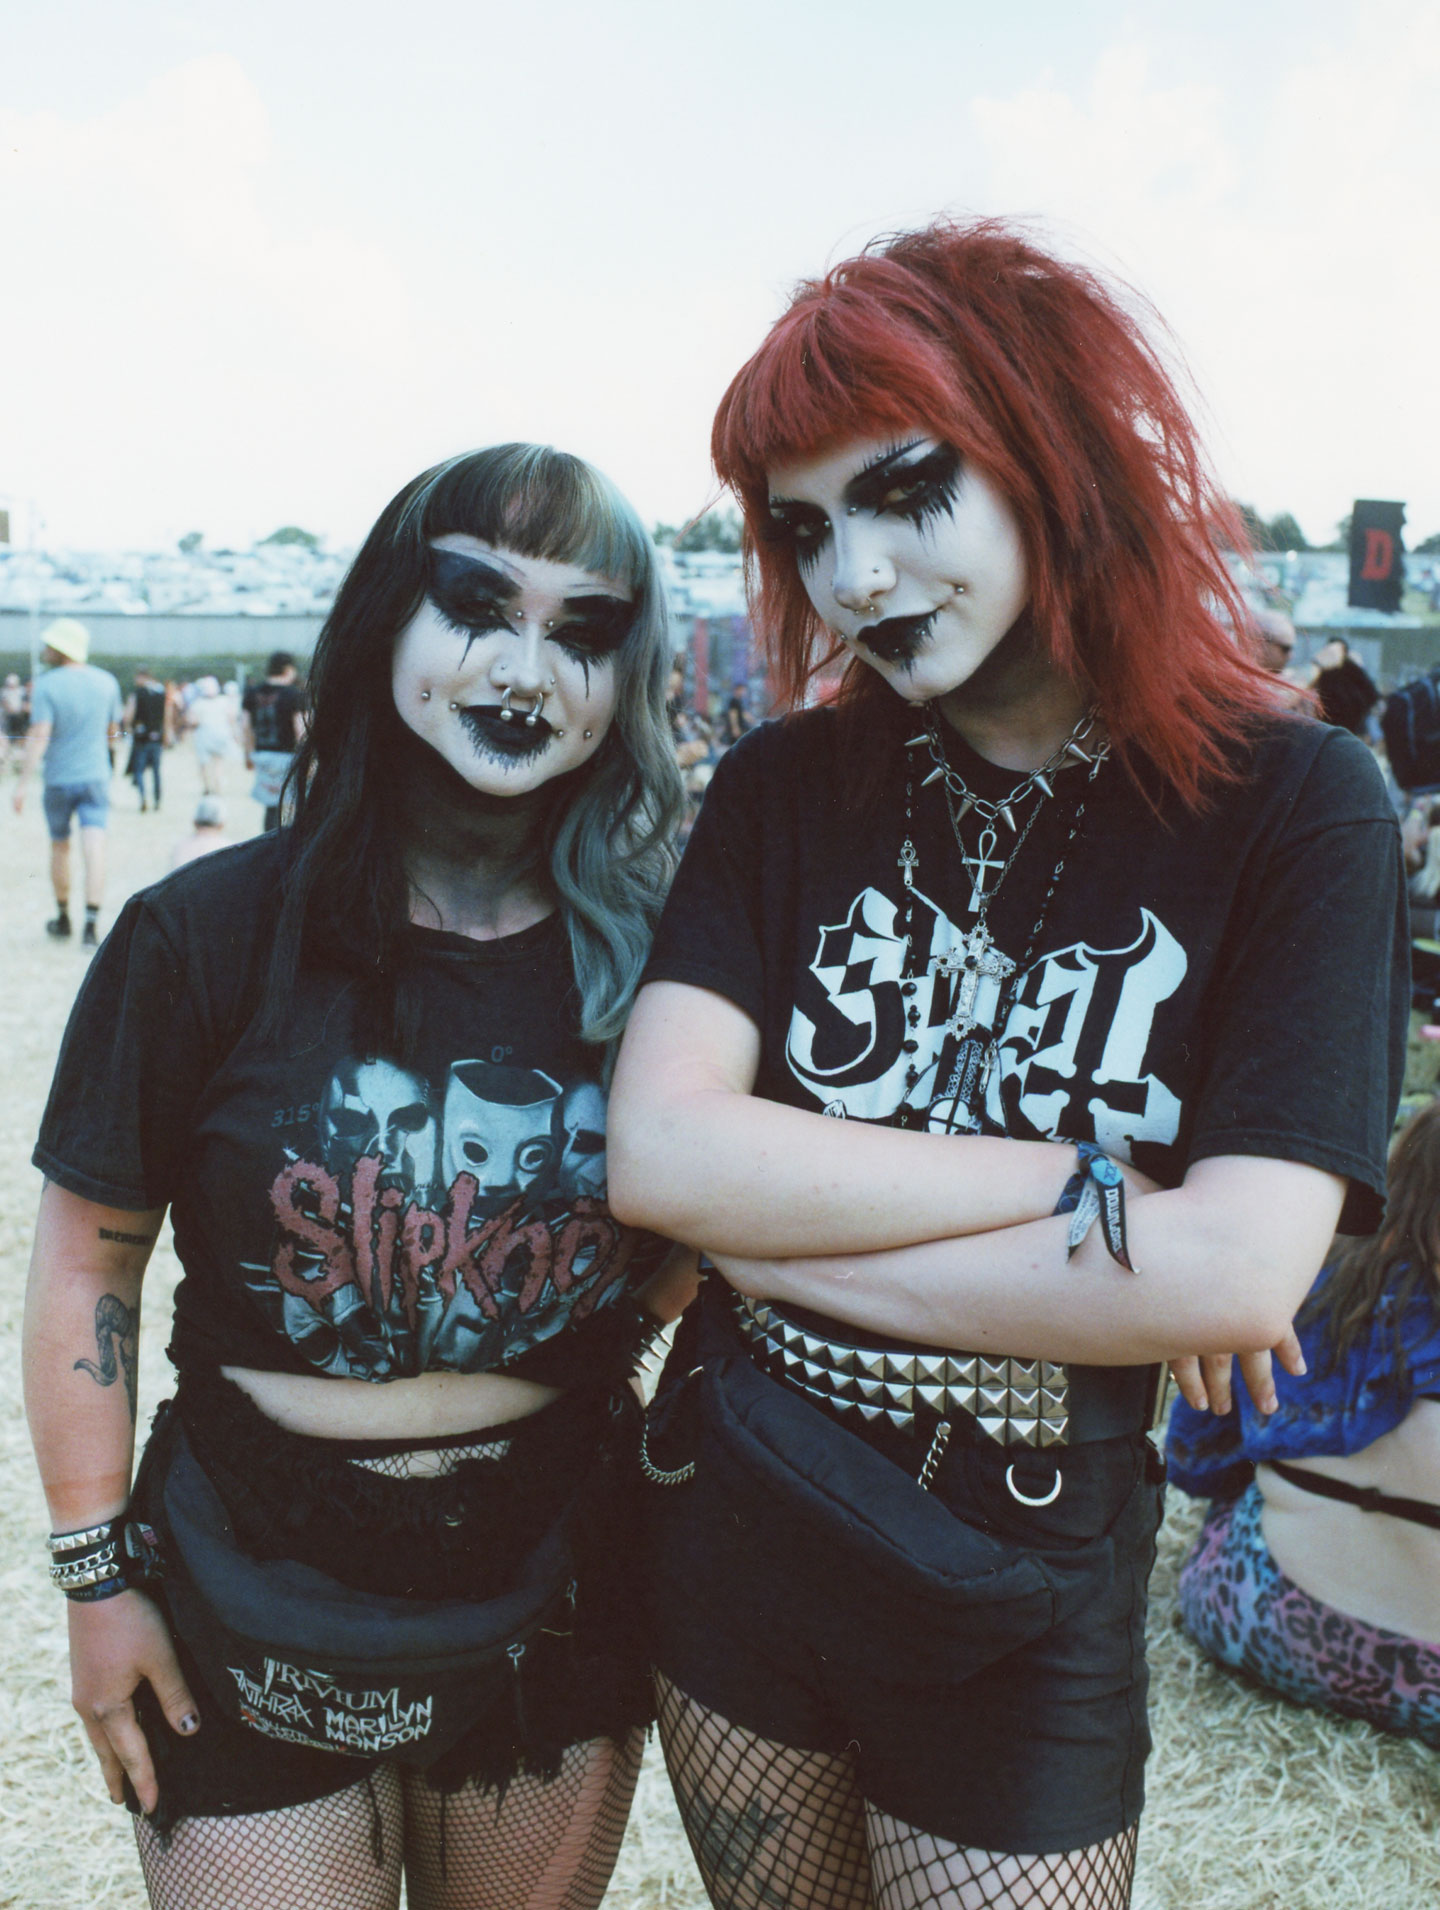 two scene kids with hair dyed red and blue stand side-by-side. their faces are painted white and they have gothic eye makeup and a lot of facial piercings